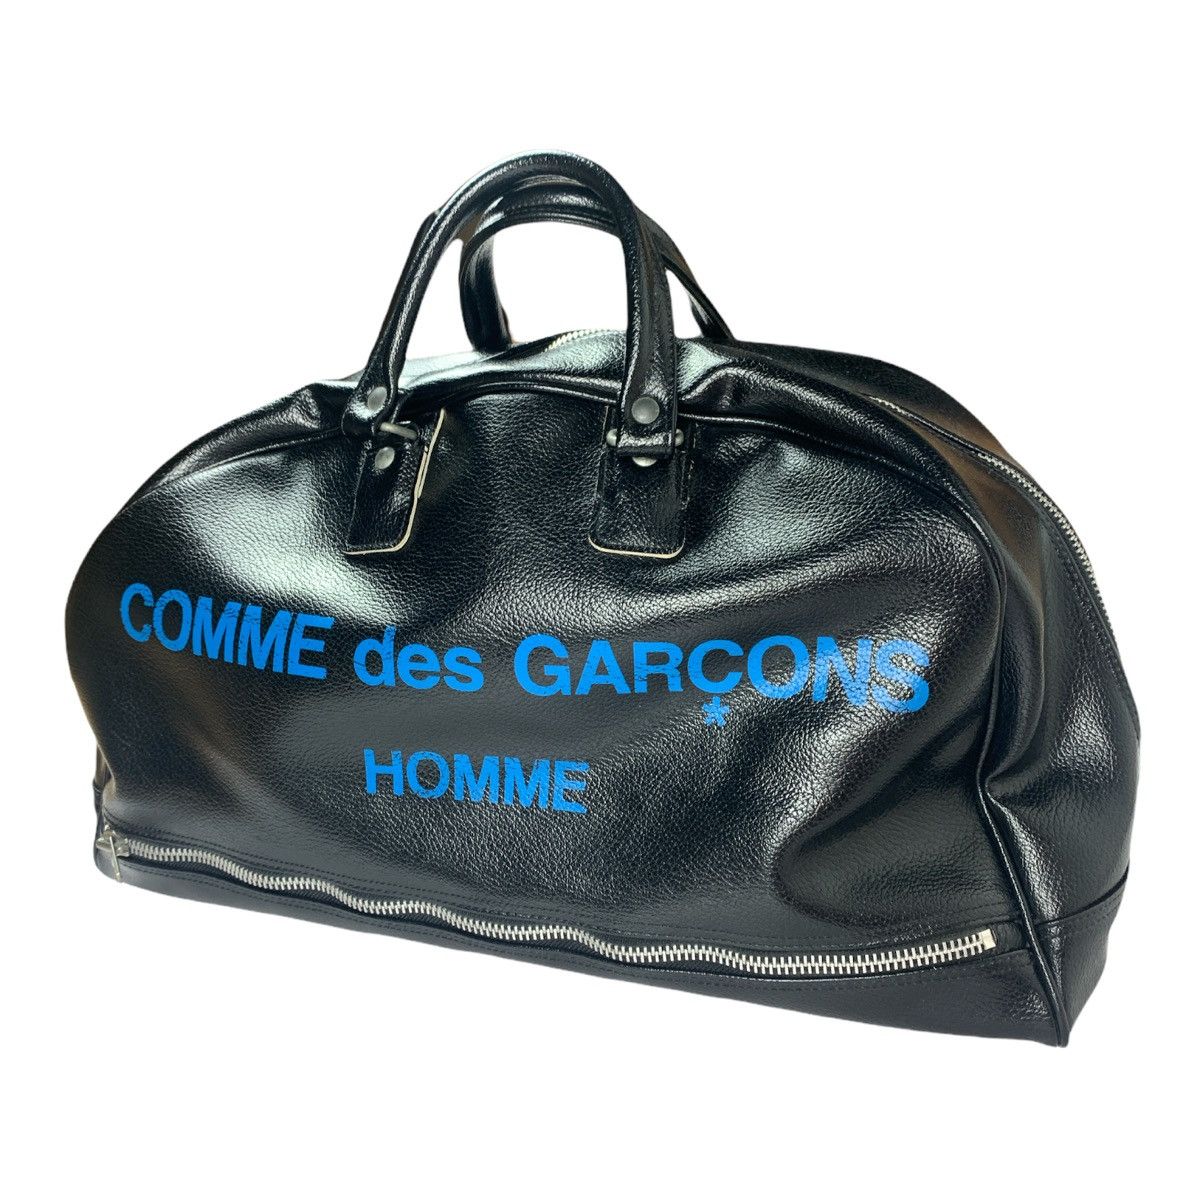 Comme des Garcons CDGH Pebbled Leather Bowling Bag | Grailed